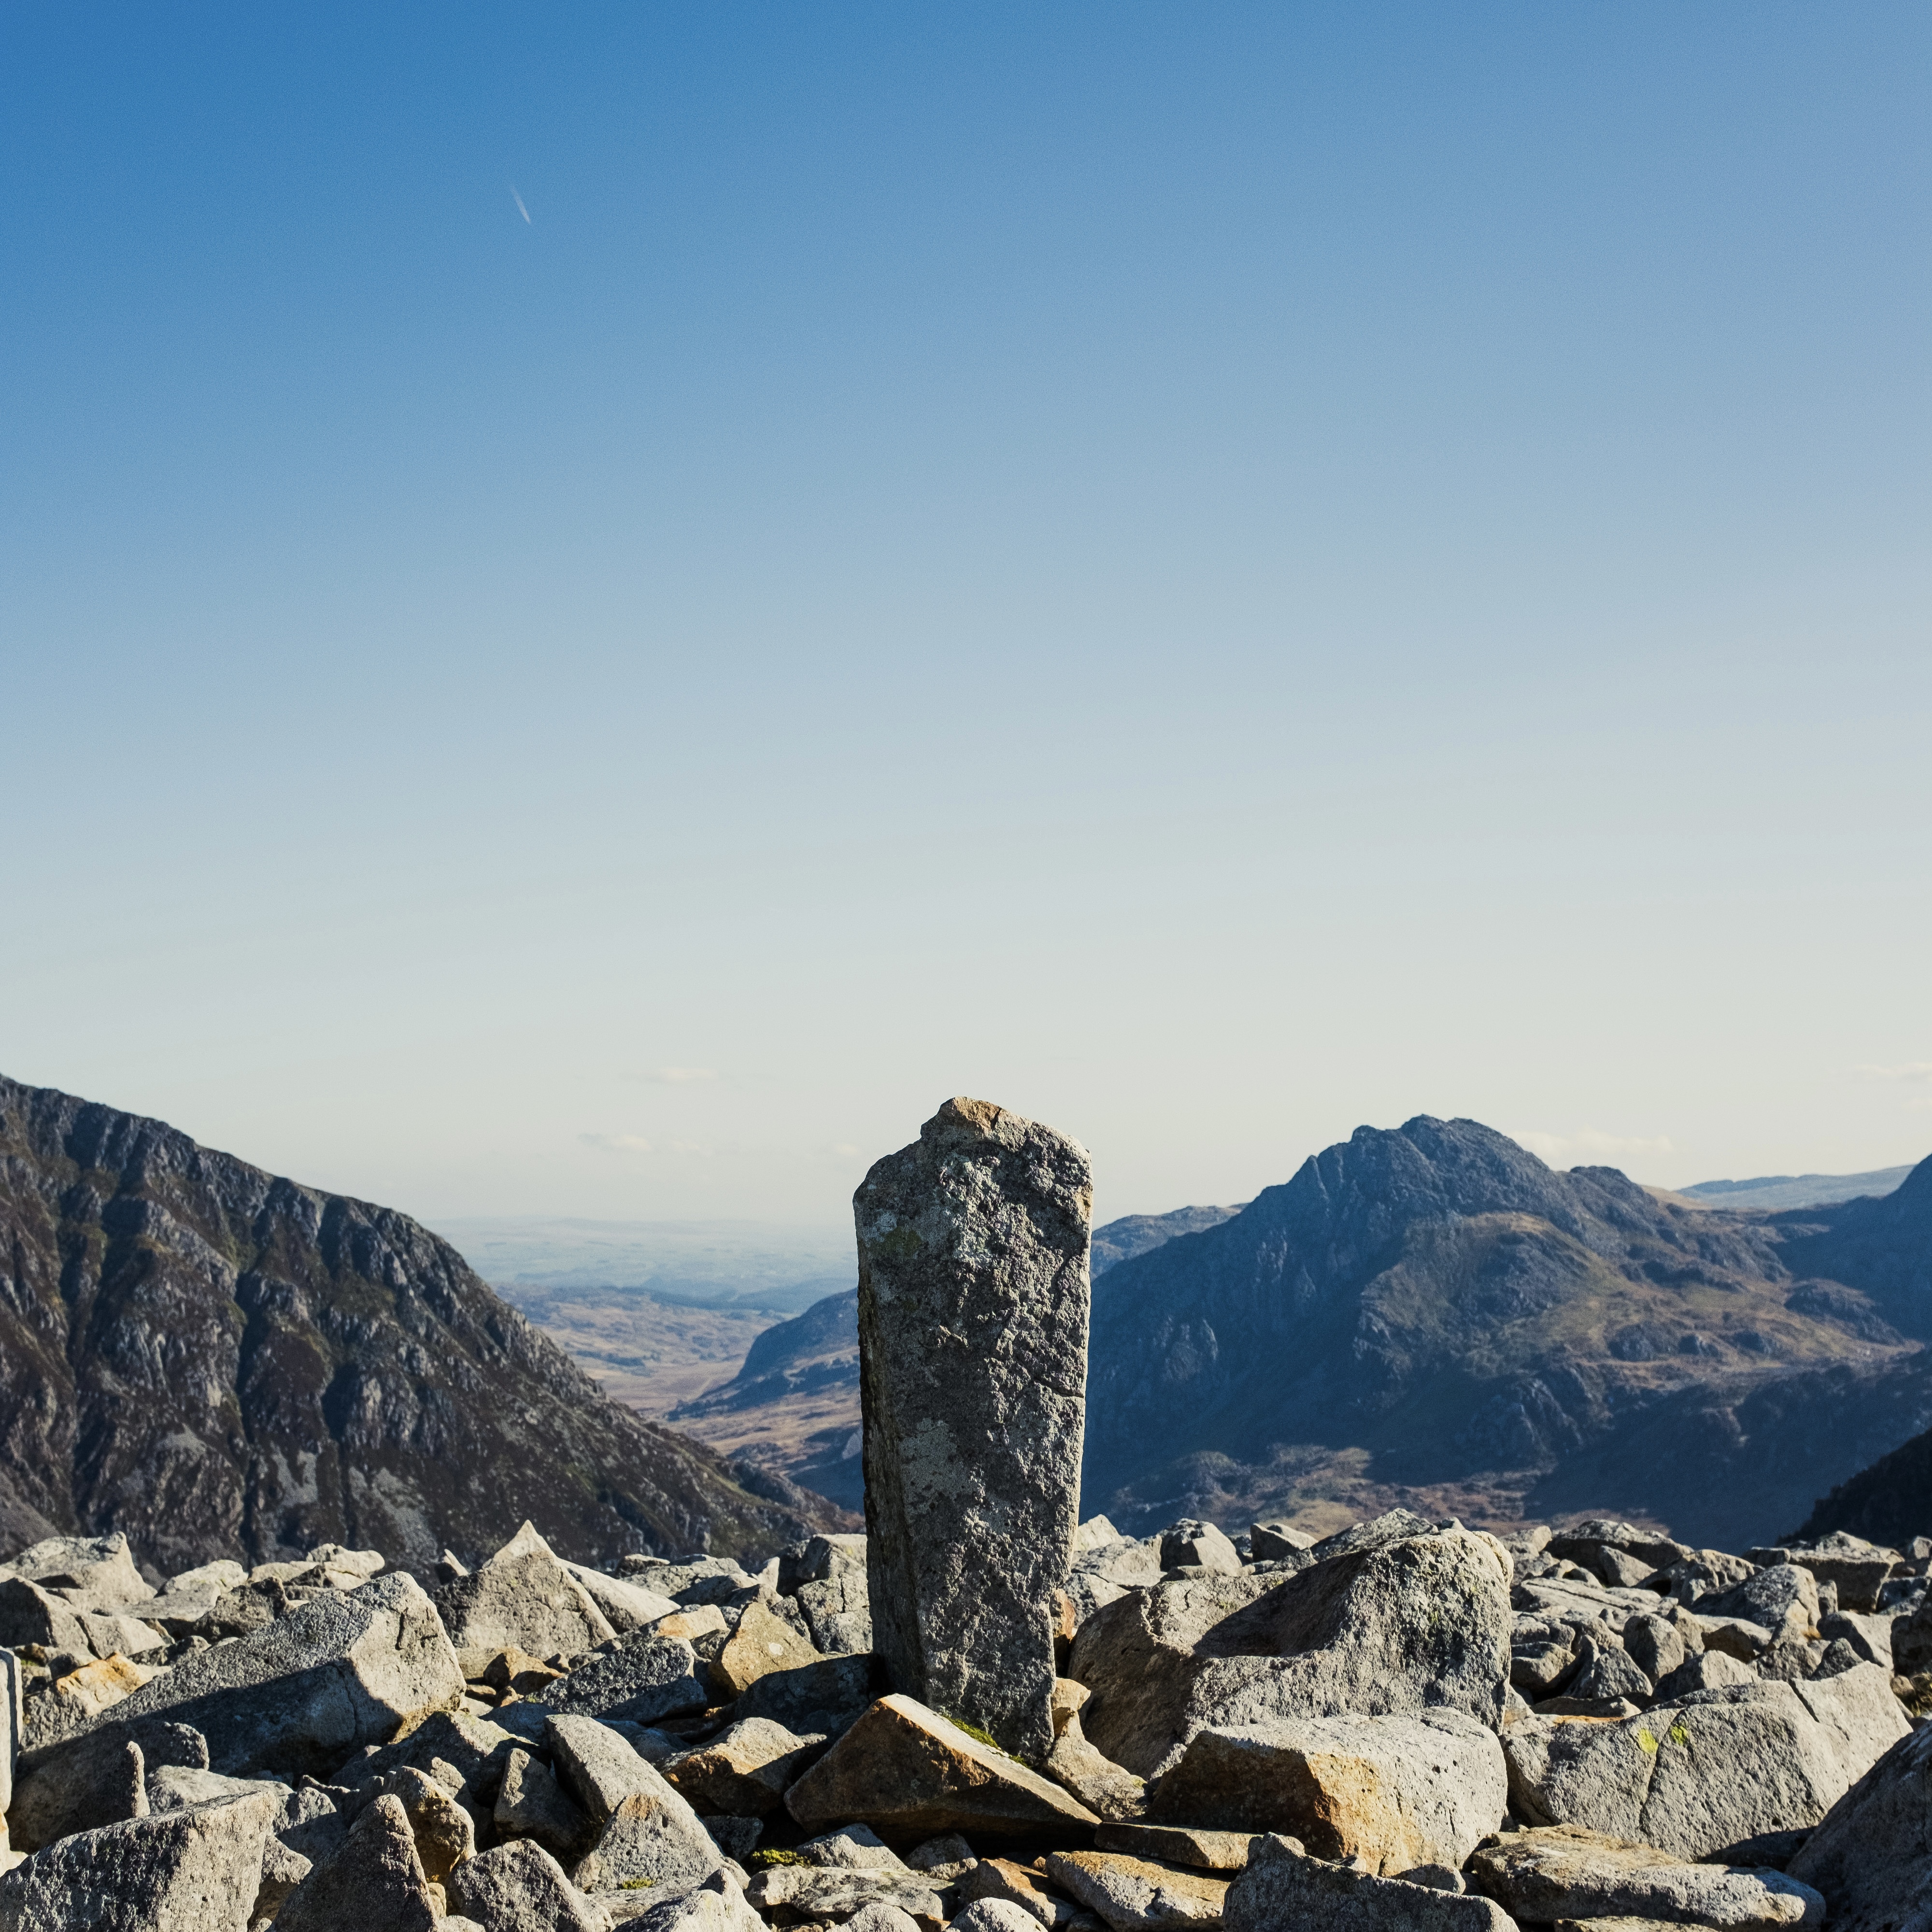 Trig point with a view to _Tryfan_ and _Pen Yr Ole Wen_